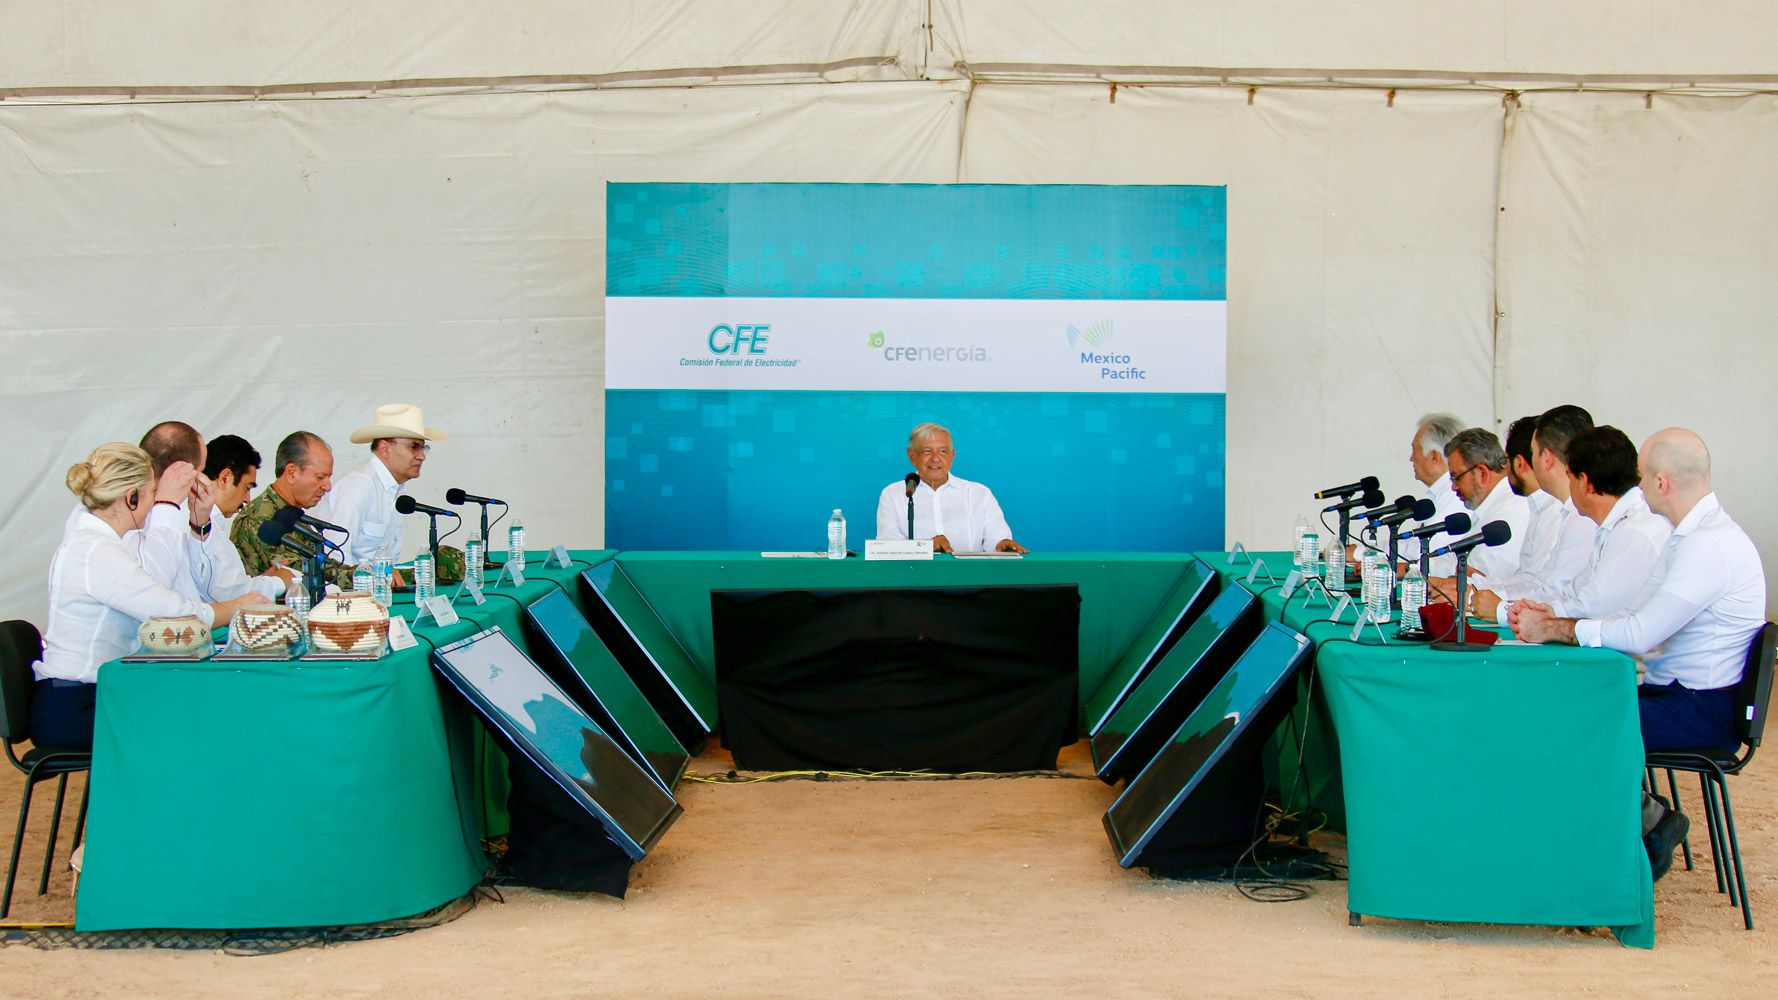 Mexico Pacific teams up with CFE on Sonora LNG project